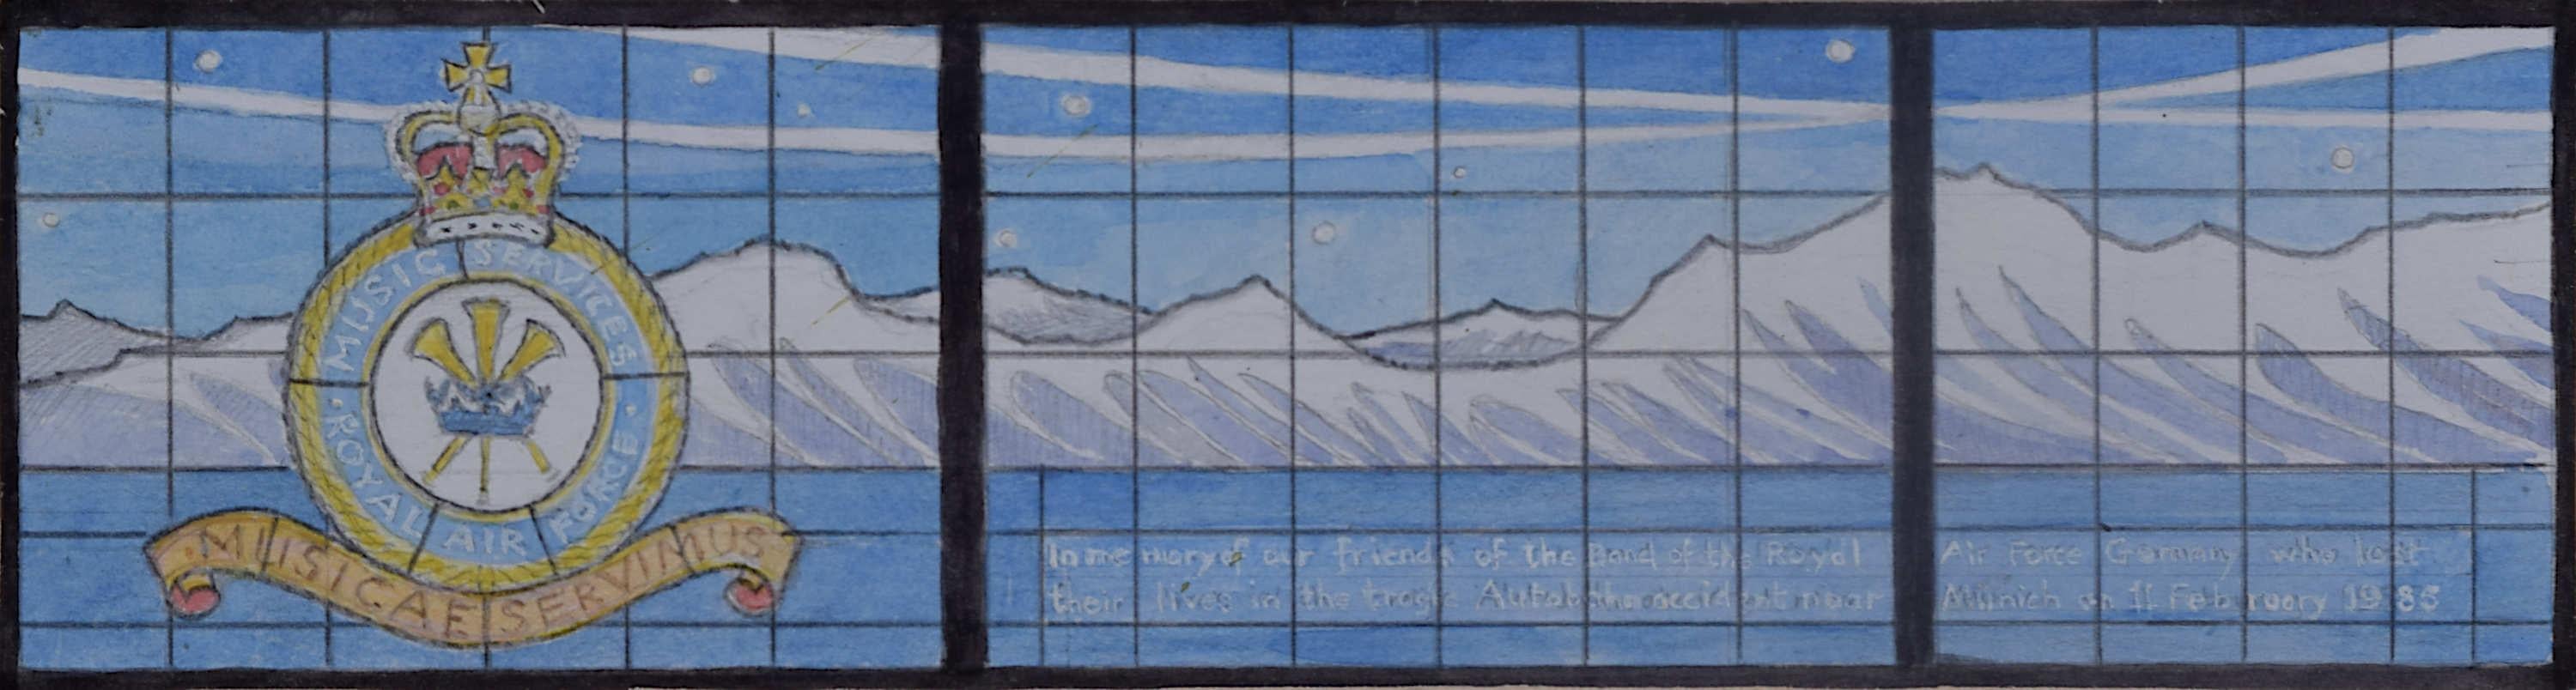 We acquired a series of watercolour stained glass designs from Jane Gray's studio. To find more scroll down to "More from this Seller" and below it click on "See all from this seller." 

Jane Gray (b.1931)
Stained Glass Design
Watercolour
6 x 22.5